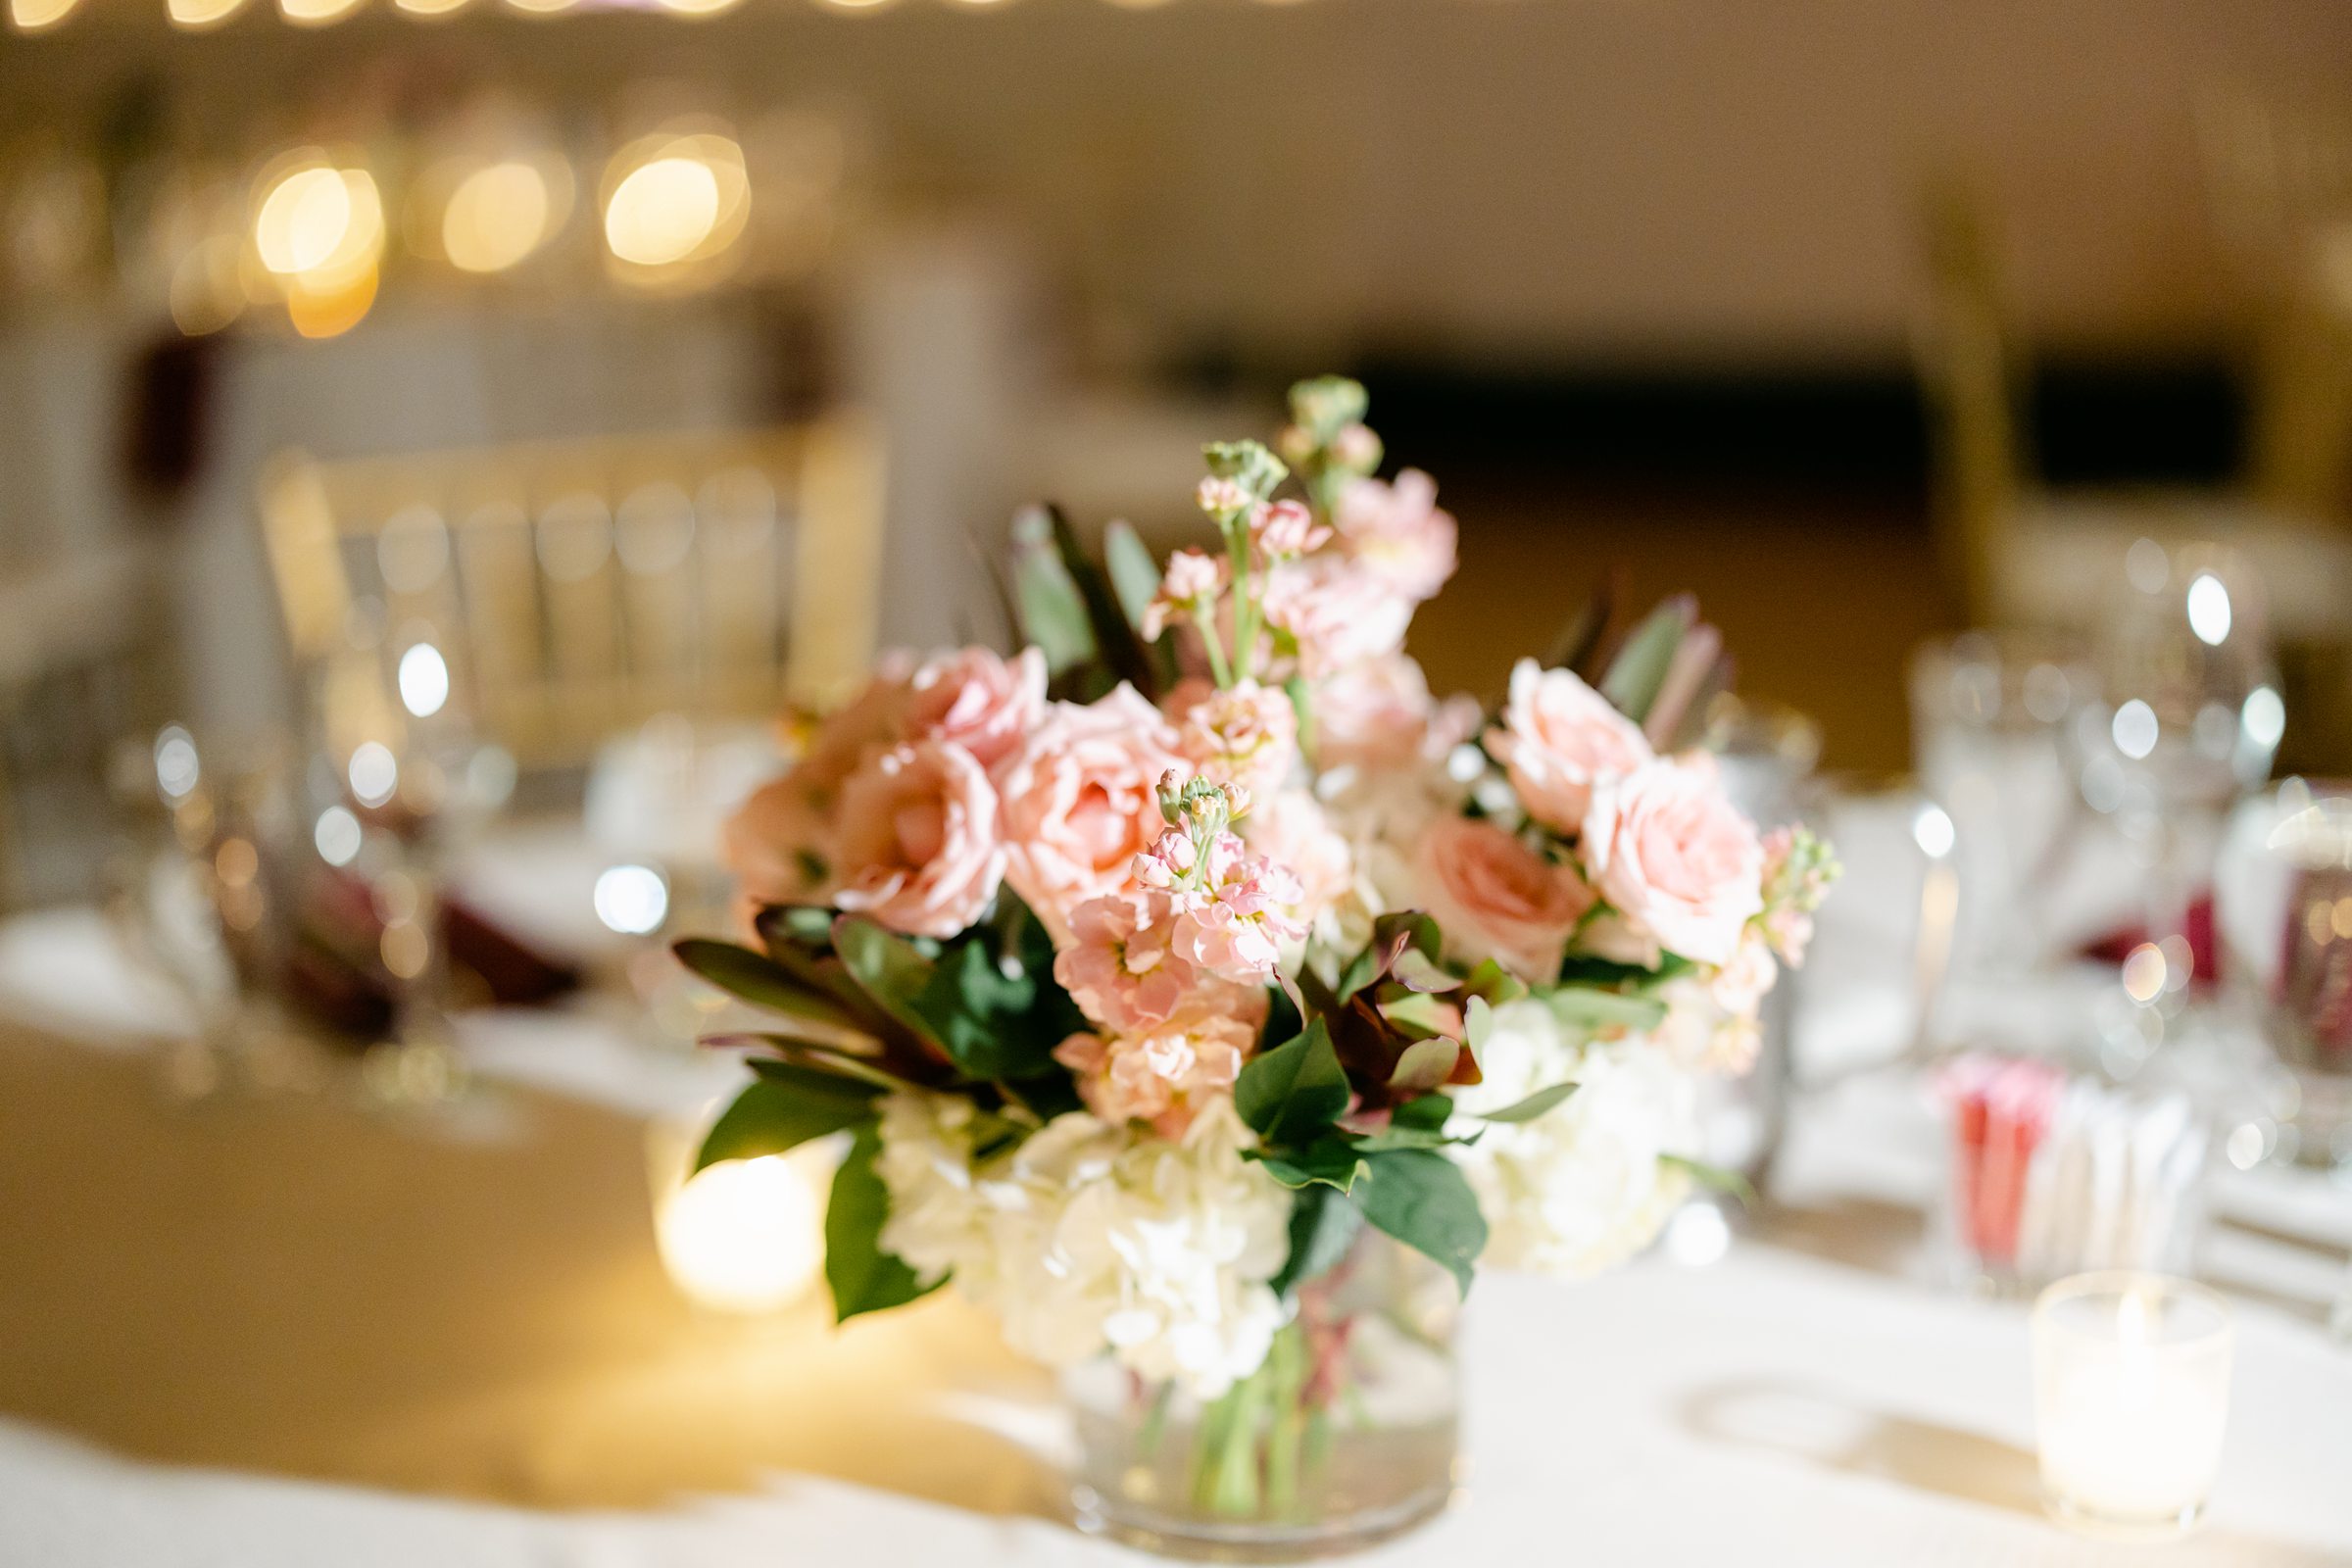 Floral by Viviano's Florist in the ballroom at the Masonic Temple in Detroit Michigan by Michele Maloney Photography